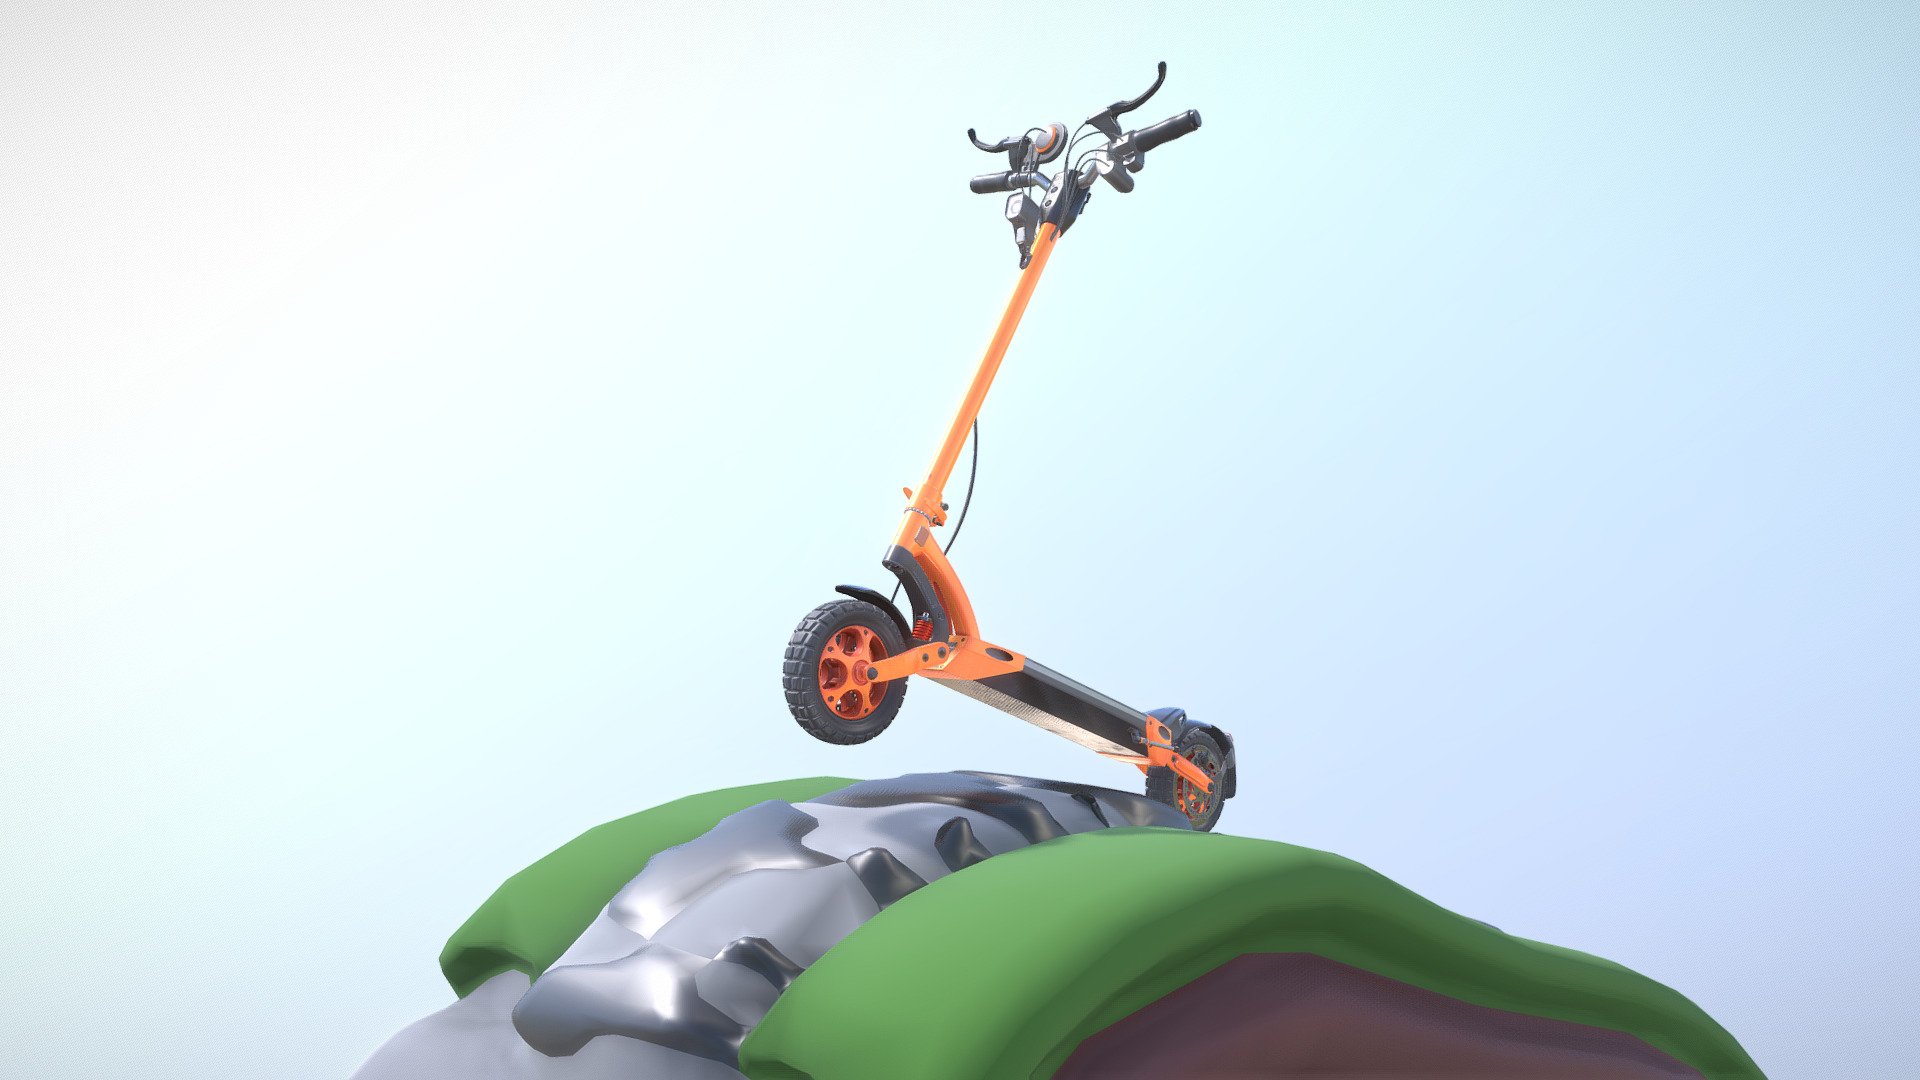 Here is the rigged low-poly version of the off-road e-scooter with orange texture set.


All static parts for the e-scooter and the rigged version without animation are available separately as *.blend (with packed textures) downloadable as additional file folder. 

I have also added some common exchange formats and a texture folder for the 8k PBR-textures. 



Rigged Off-Road E-Scooter:




Object Dimensions -  1.317m x 0.593m x 1.370m

Vertices = 26781

Edges = 59942

Polygons = 33071







Available Exchange Formats




Autodesk FBX (.fbx)



OBJ (.obj, .mtl)

glTF (.gltf, .glb)

X3D (.x3d)

Collada (.dae)

Stereolithography (.stl)

Polygon File Format (.ply)

Alembic (.abc)

DXF (.dxf)

USDC






Last update 27.04.2023



3D modelled, textured, rigged and animated by 3DHaupt in Blender 2.93 3d model